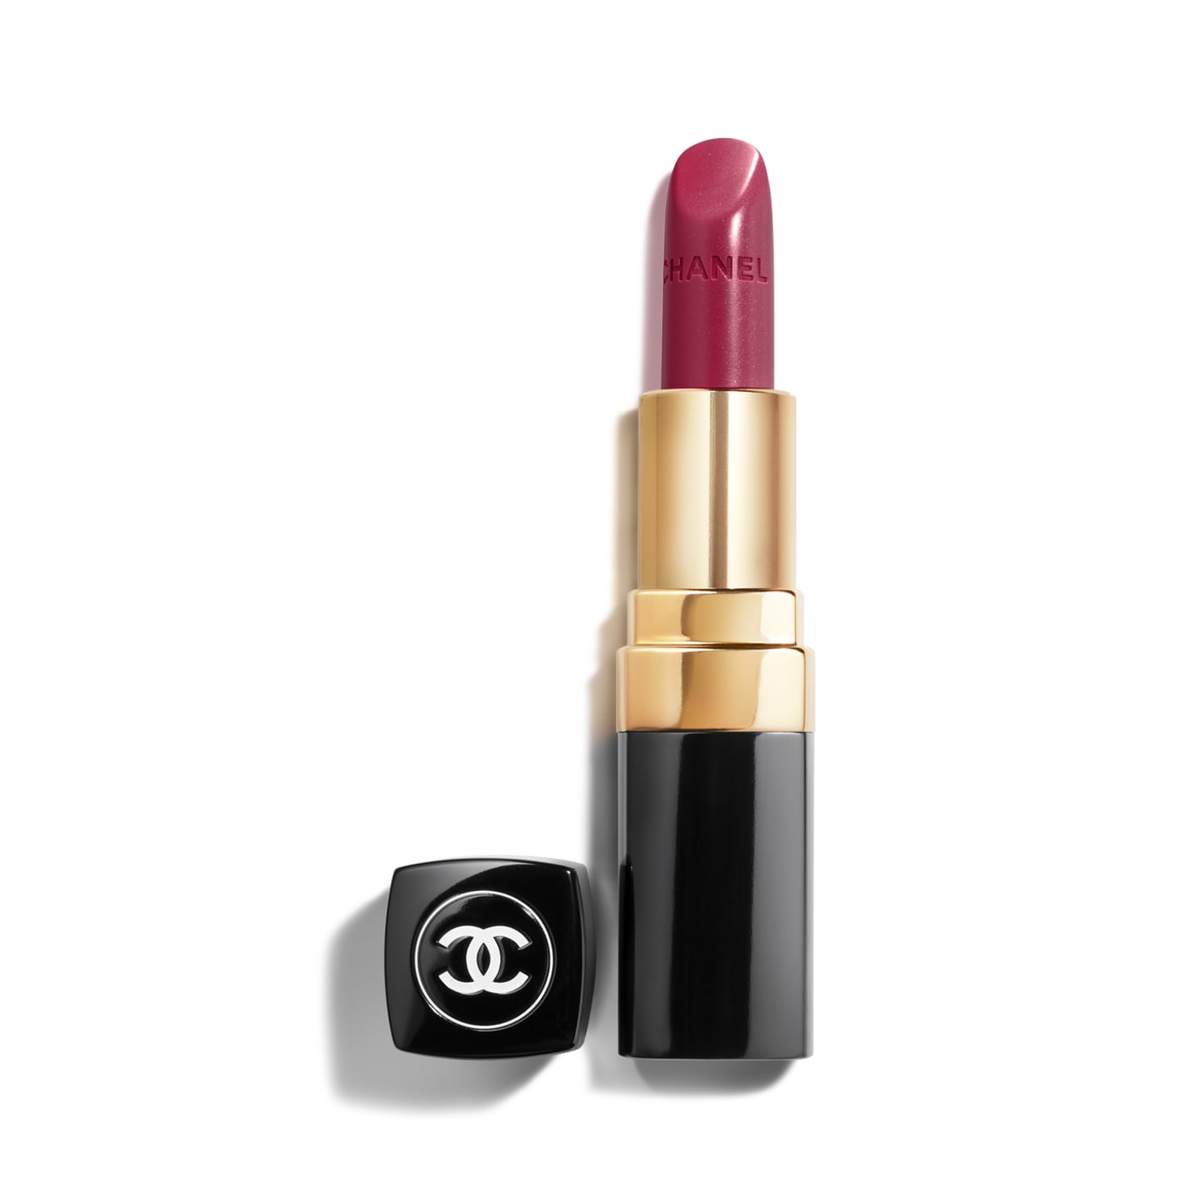 Chanel Beauty Releases 'Le Blanc' Makeup Collection